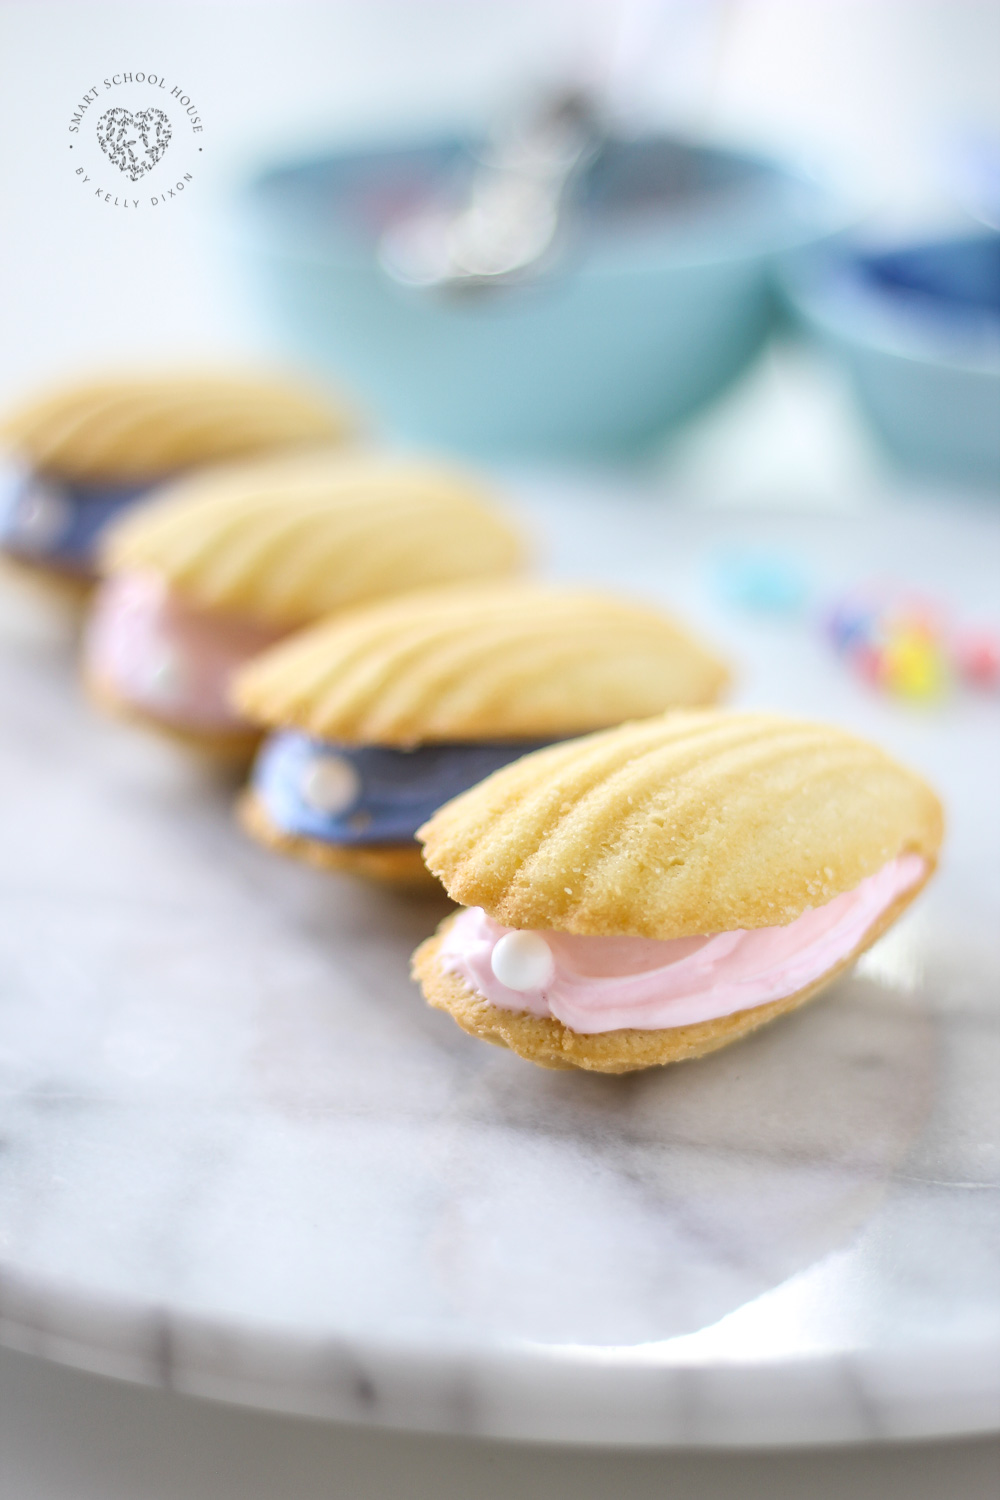 Seashell Pearl Cookies - for a beach theme party or mermaid party. Also fun for a quick and easy dessert using Madeline cookies. #UnderTheSea #MermaidParty #BeachTheme #SeashellCookies